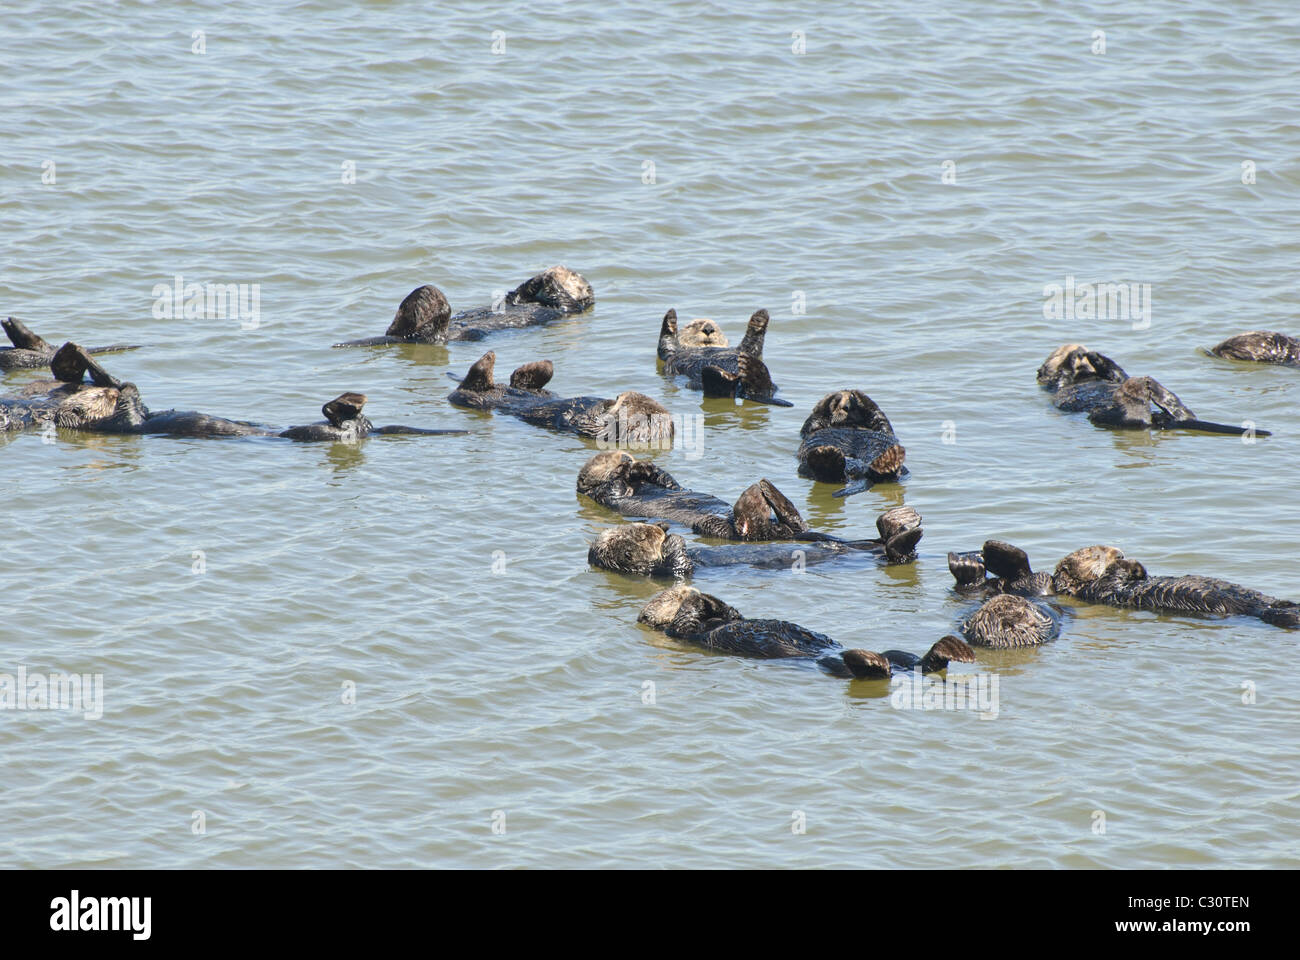 A large group of sea otters (Enhydra lutris) located in the Elkhorn Slough at Moss Landing, California. Stock Photo